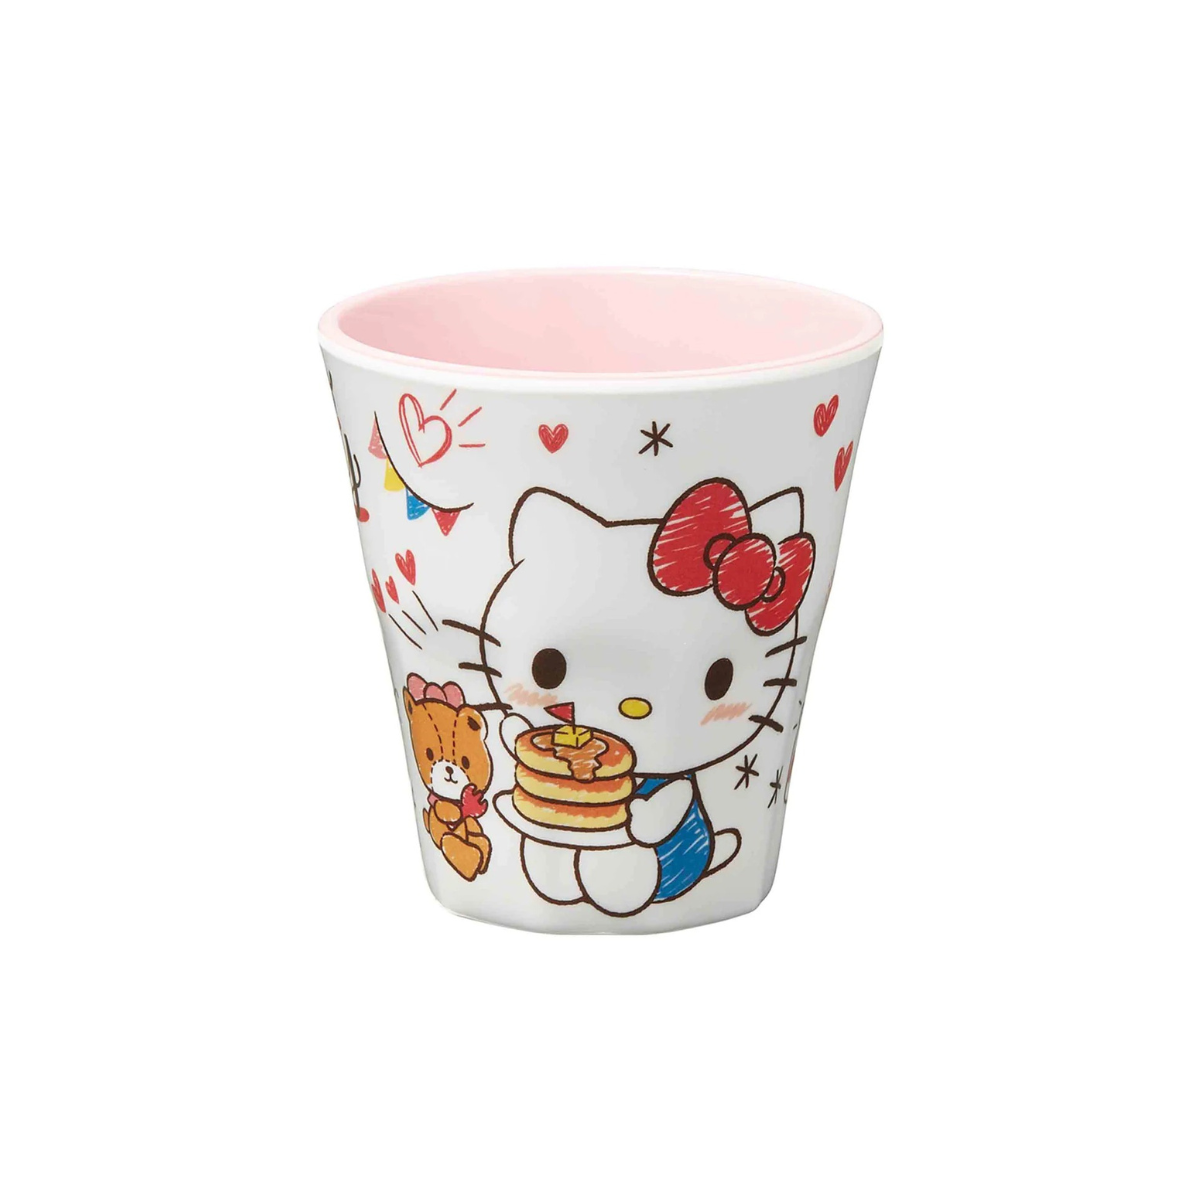 Hello Kitty Snack Time Melamine Cup Home Goods CLEVER IDIOTS   